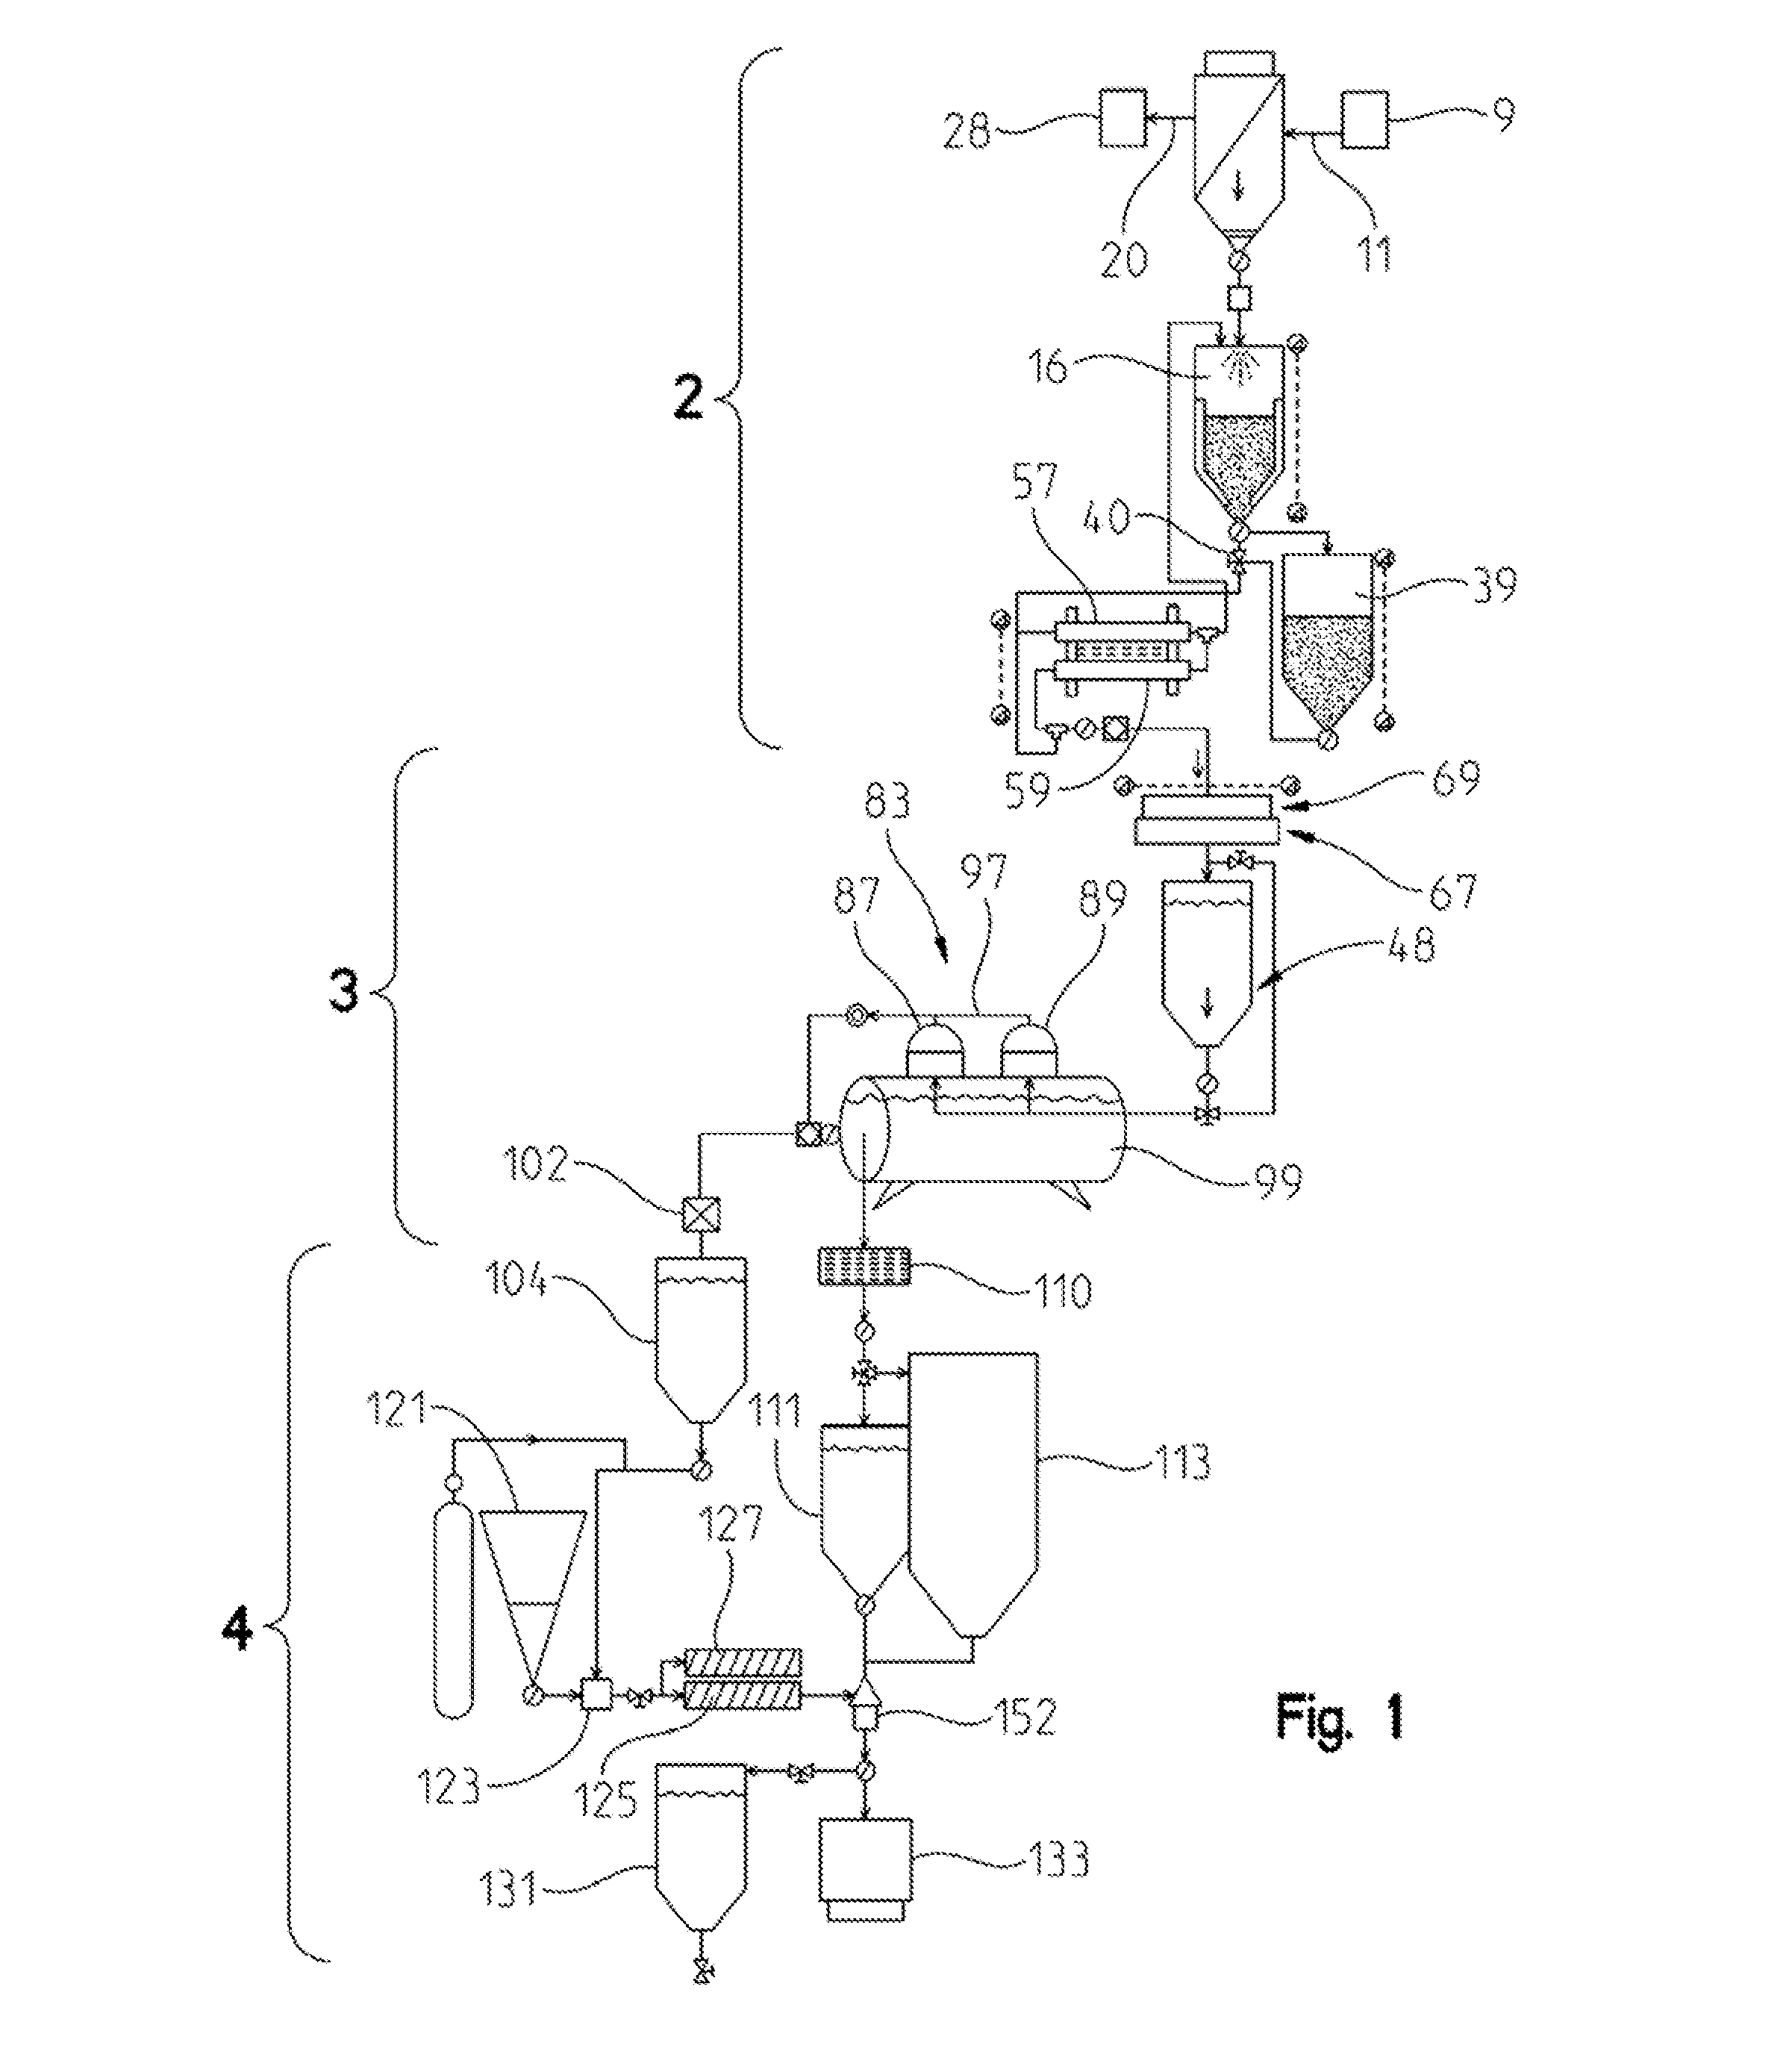 Continuous coolant purification process and device